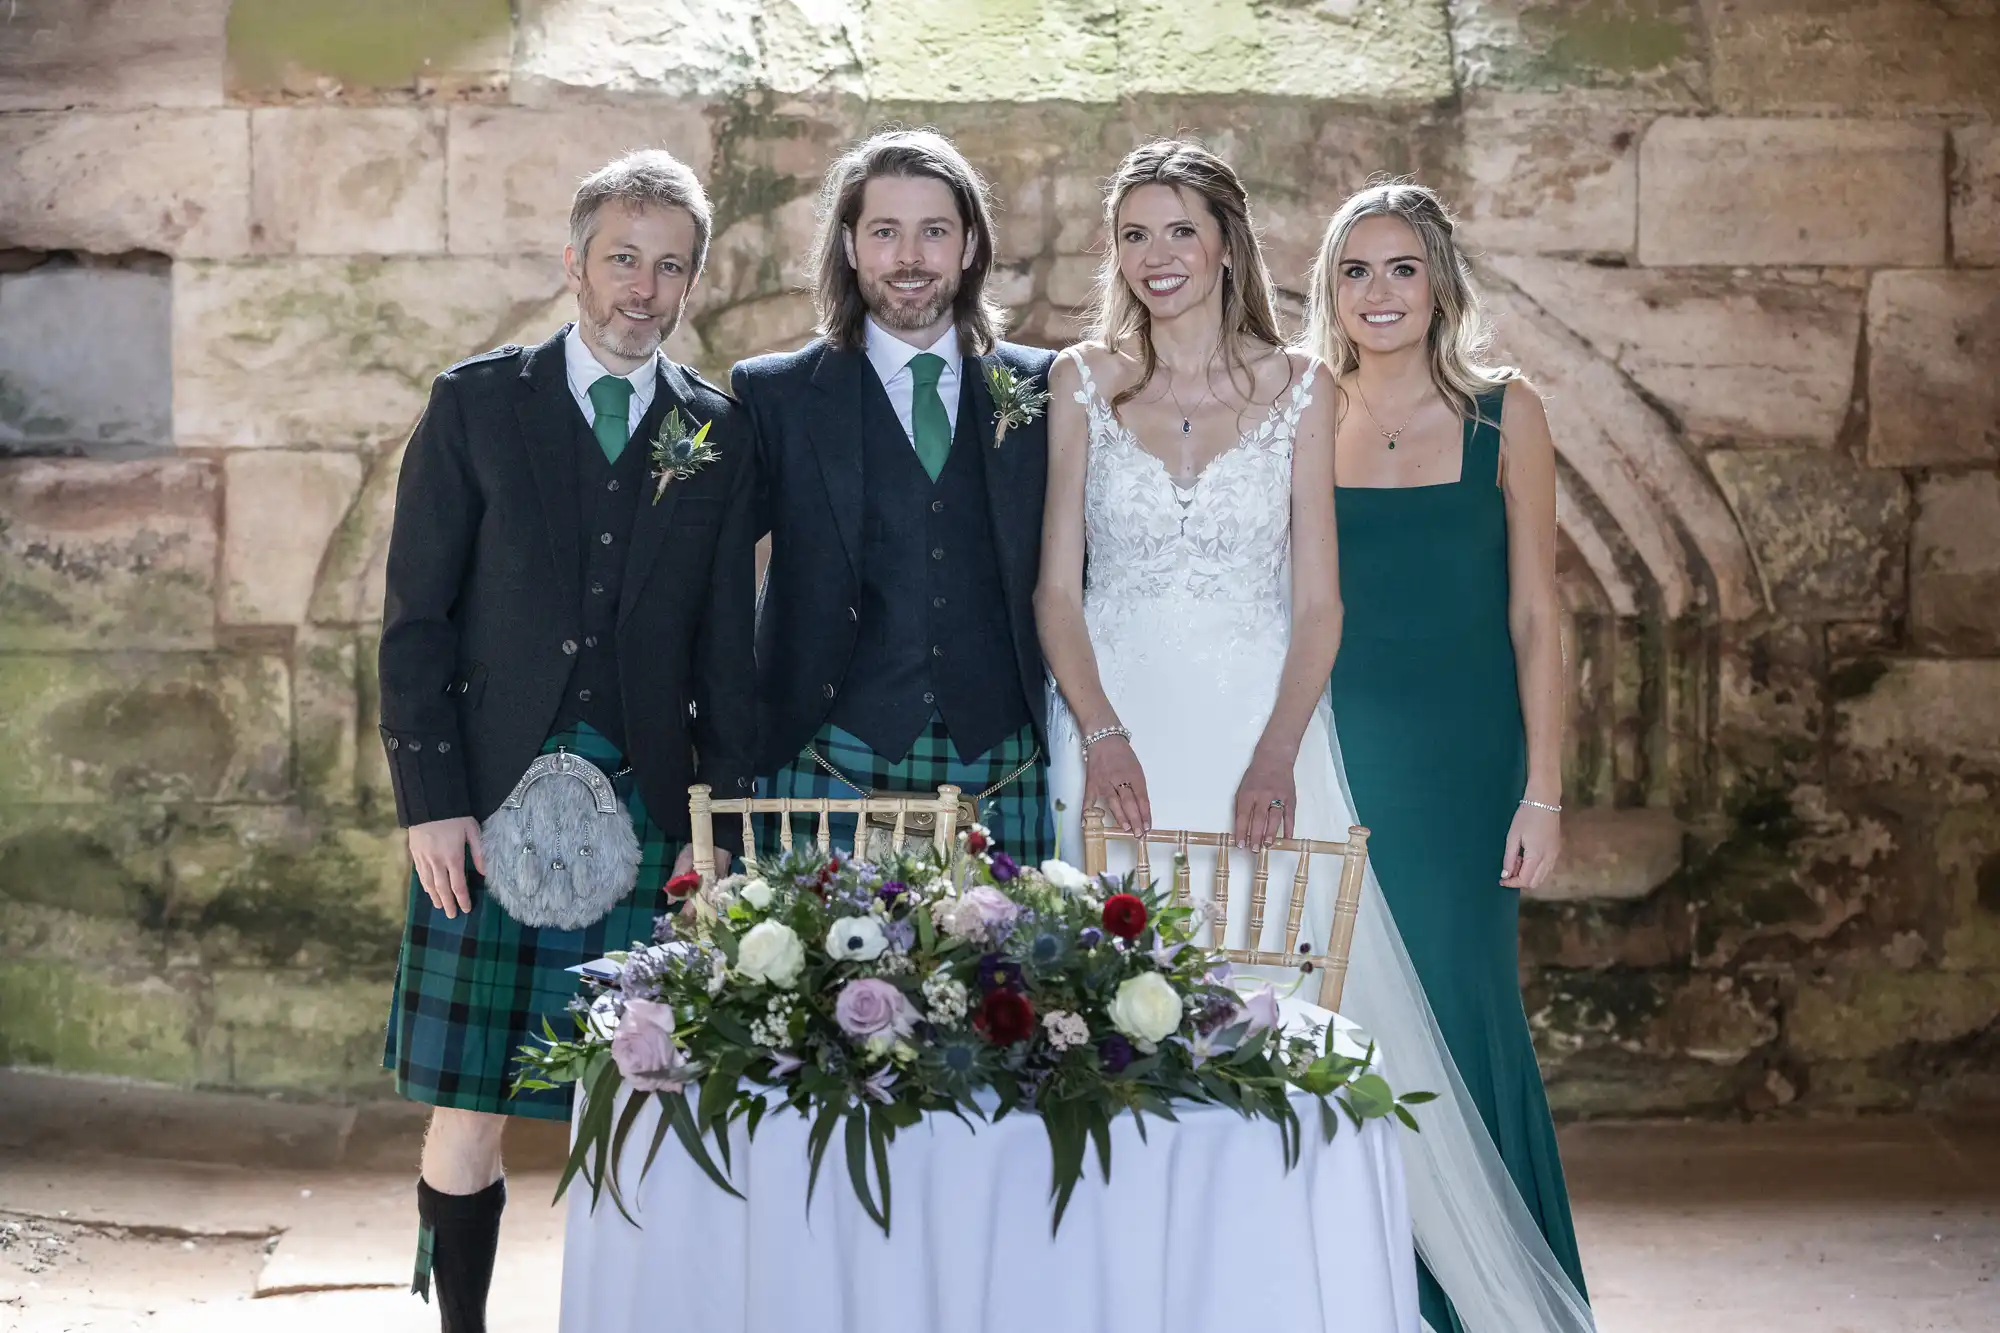 Four people, two men in kilts and two women in dresses, stand behind a table with a floral arrangement in what appears to be a stone building.